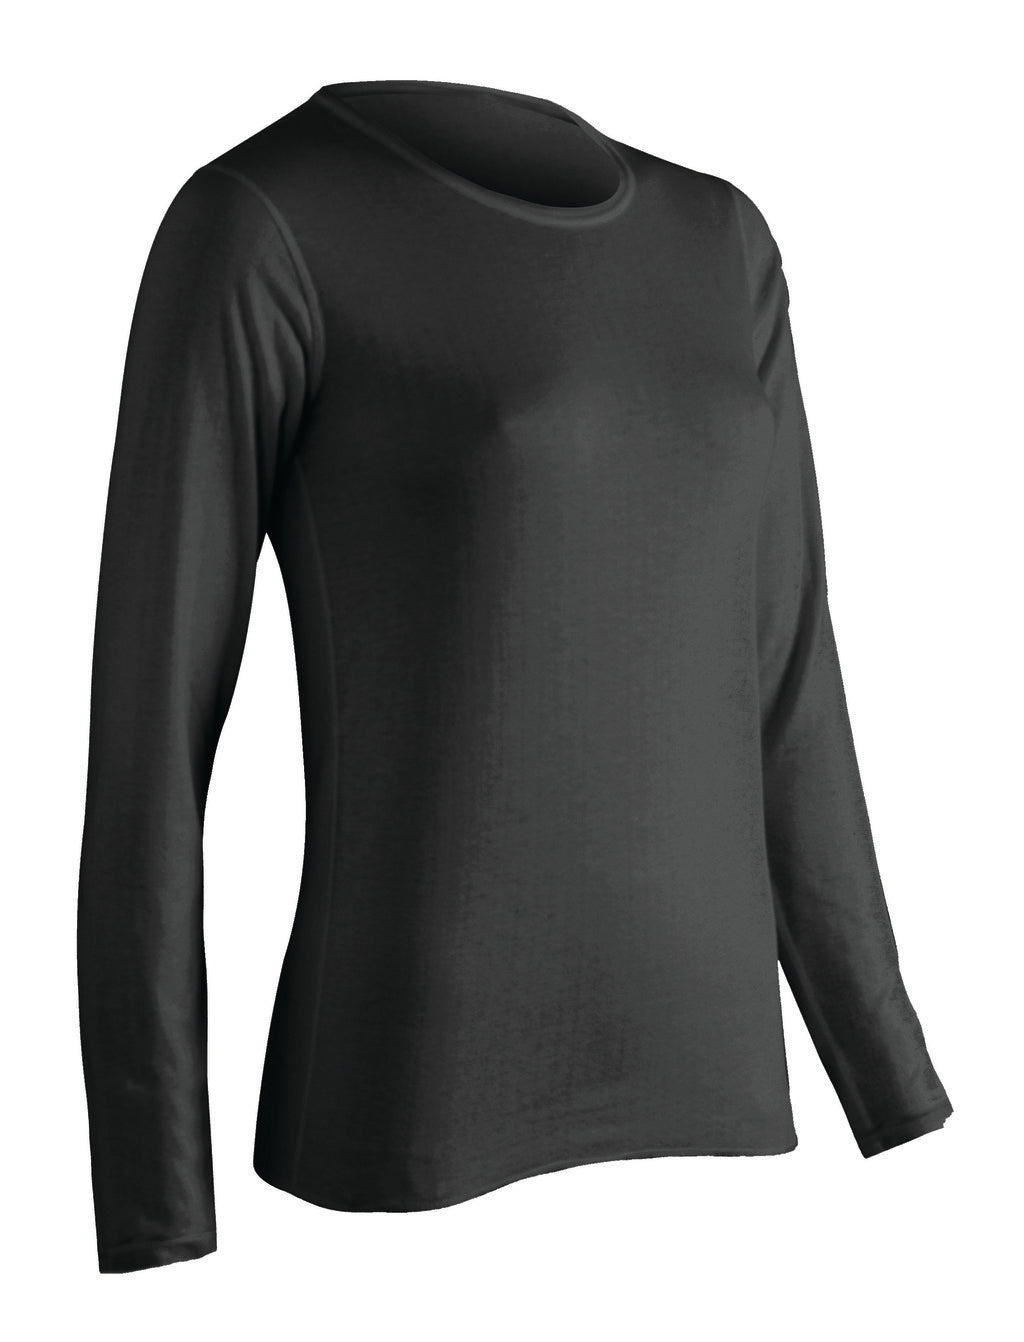 ColdPruf Performance Women's Crew Base Layer Top